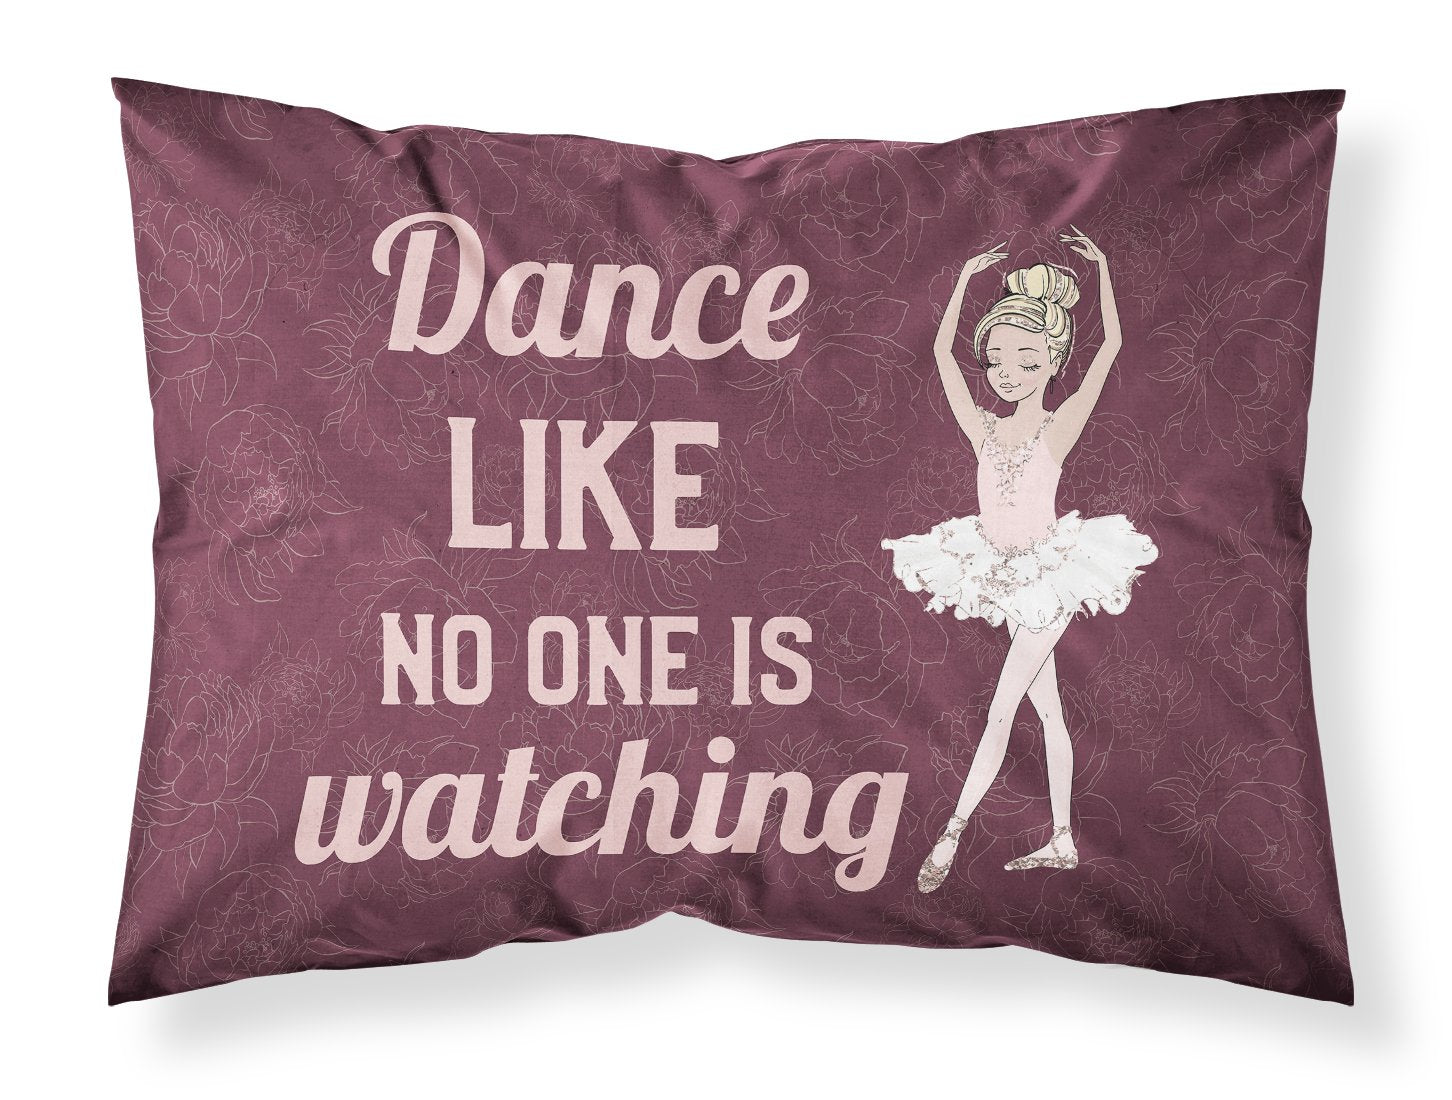 Buy this Dance like no one is watching Fabric Standard Pillowcase